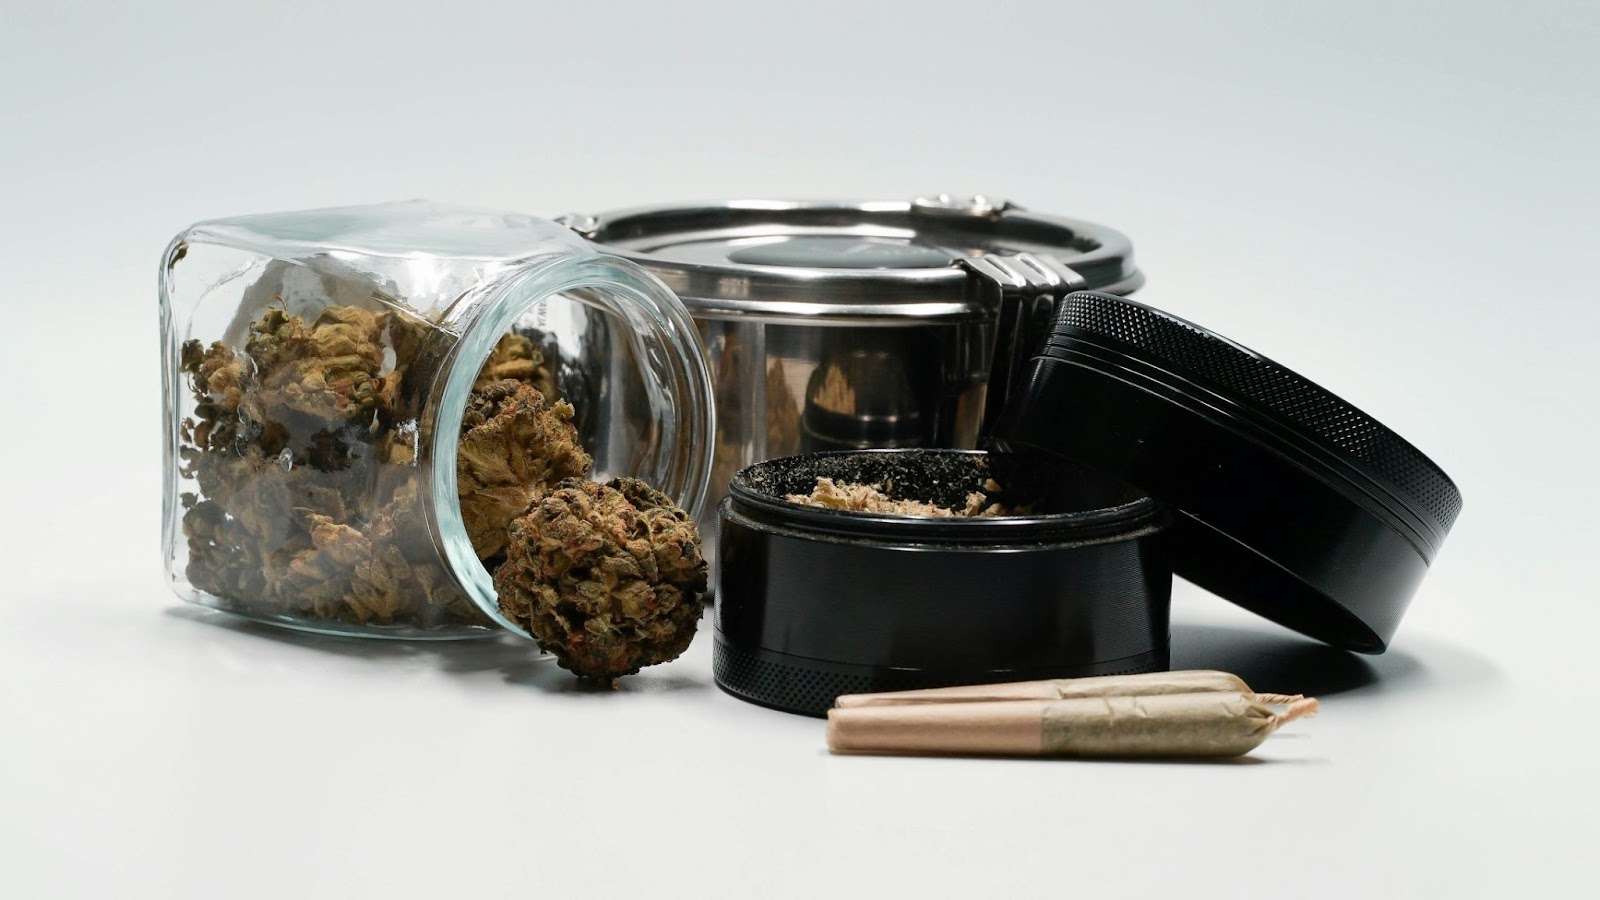 A glass jar with cannabis buds, a black grinder, and a pre-rolled joint.